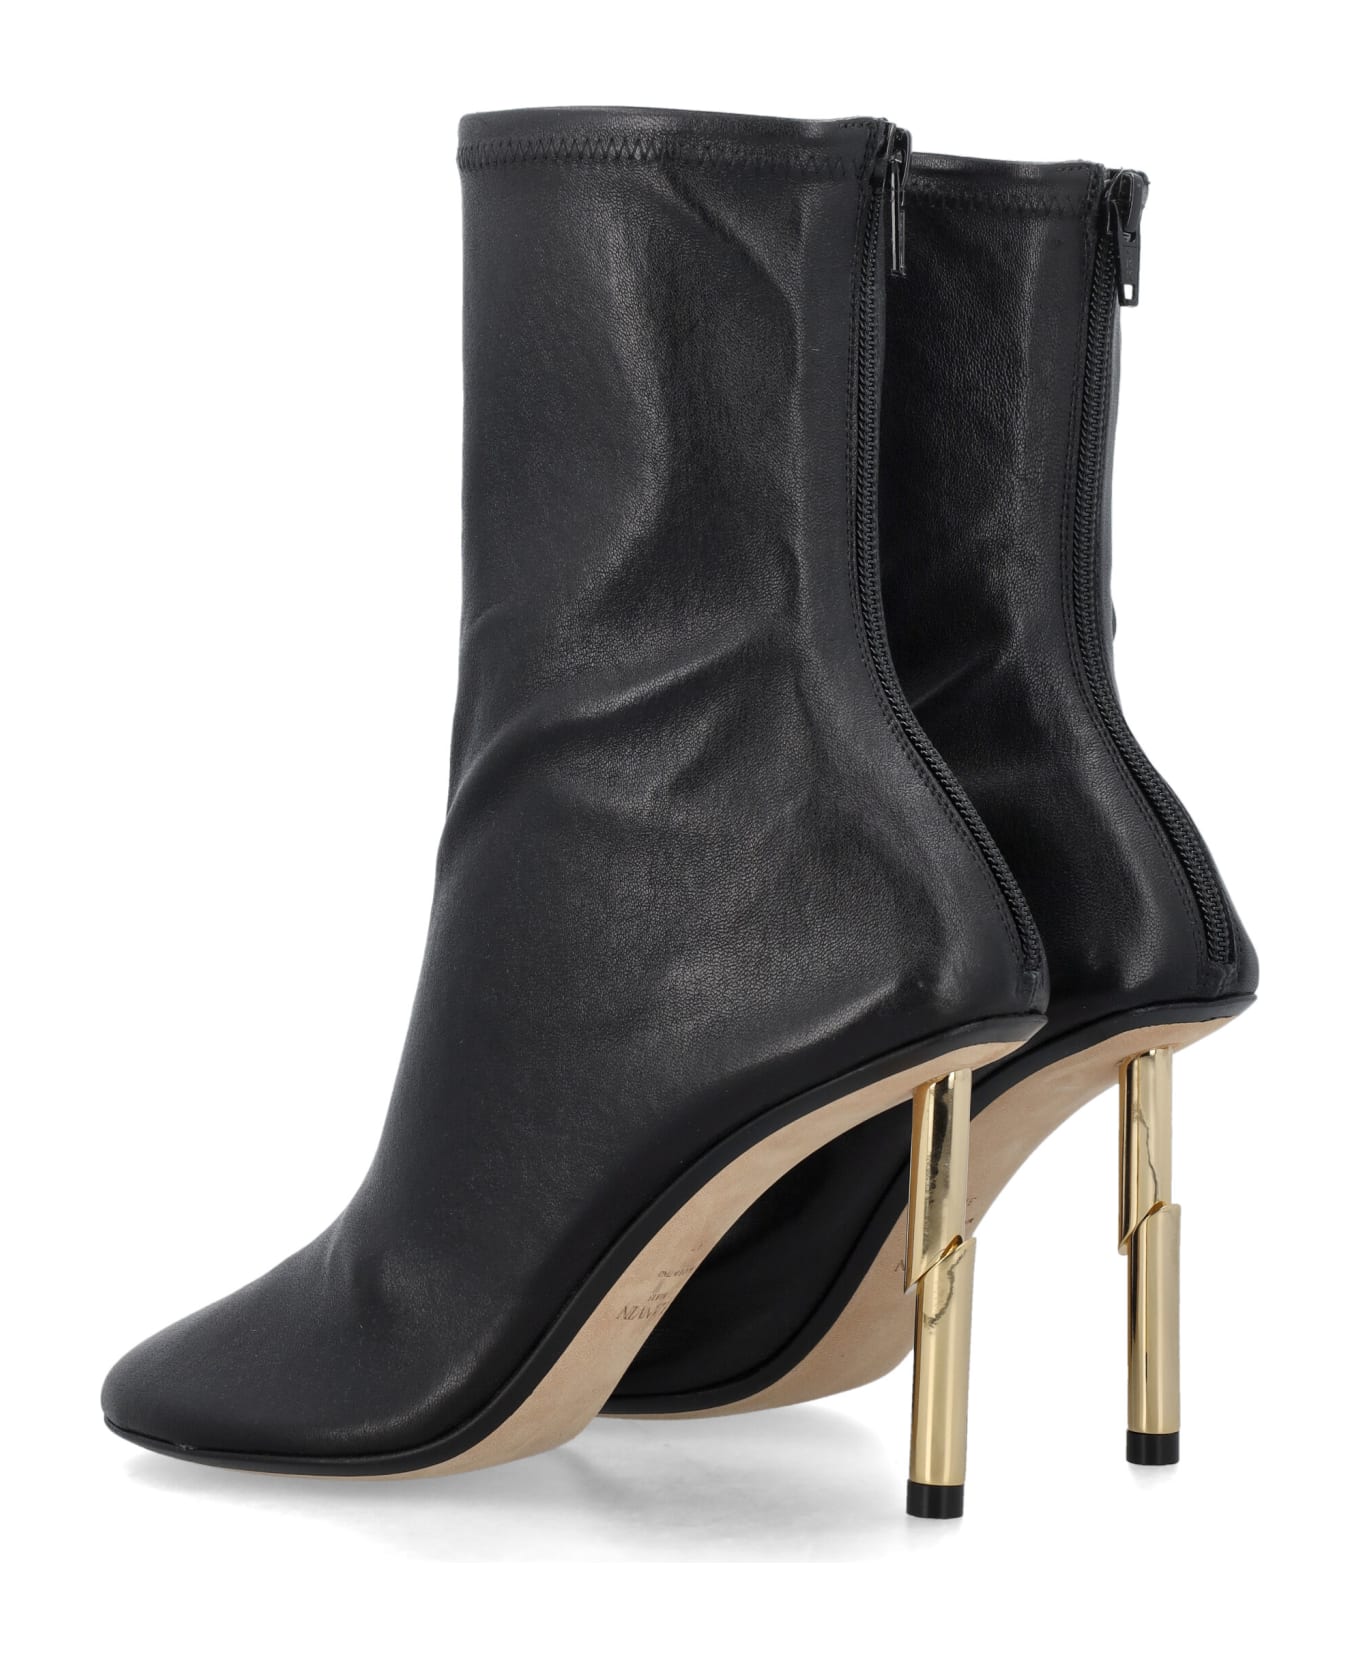 Lanvin Sequence Ankle Boots - BLACK ブーツ